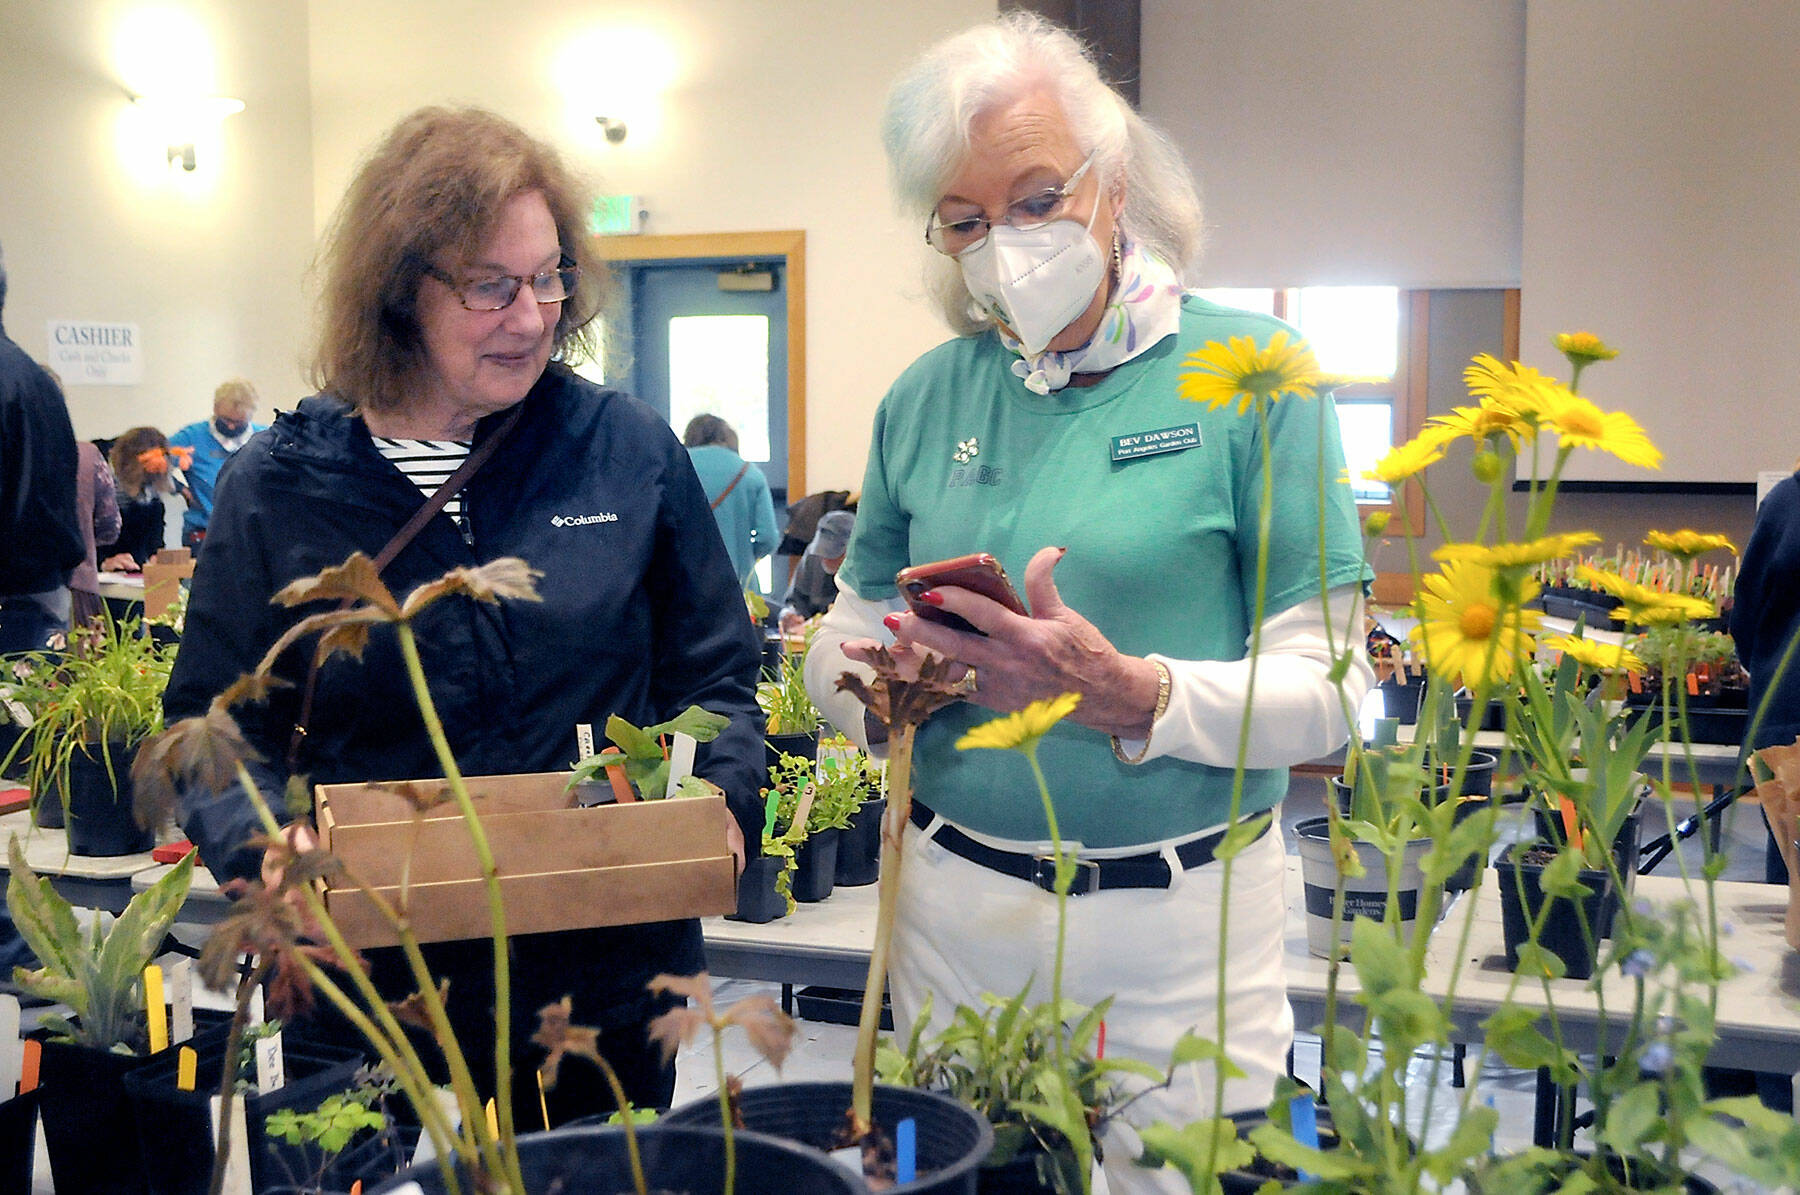 Peggy DeYoung of Port Angeles, left, talks about plants with Port Angeles Garden Club member Bev Dawson during the group’s annual plant sale on Saturday at the Port Angeles Senior Center. The sale featured perennials, annuals, succulents and vegetable starts and served as a fundraiser for garden club activities. (Keith Thorpe/Peninsula Daily News)